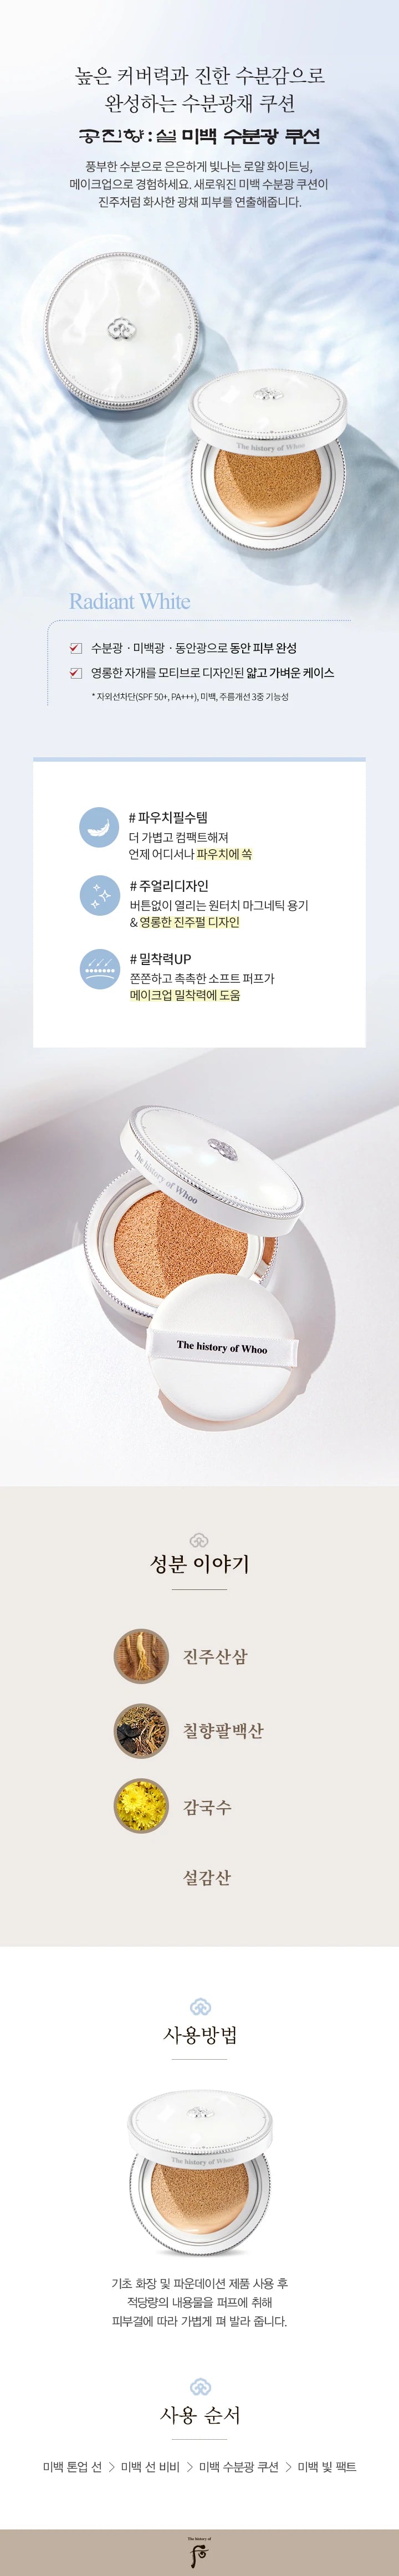 WHOO SEOL RADIANT WHITE MOISTURE CUSHION FOUNDATION SPECIAL SET